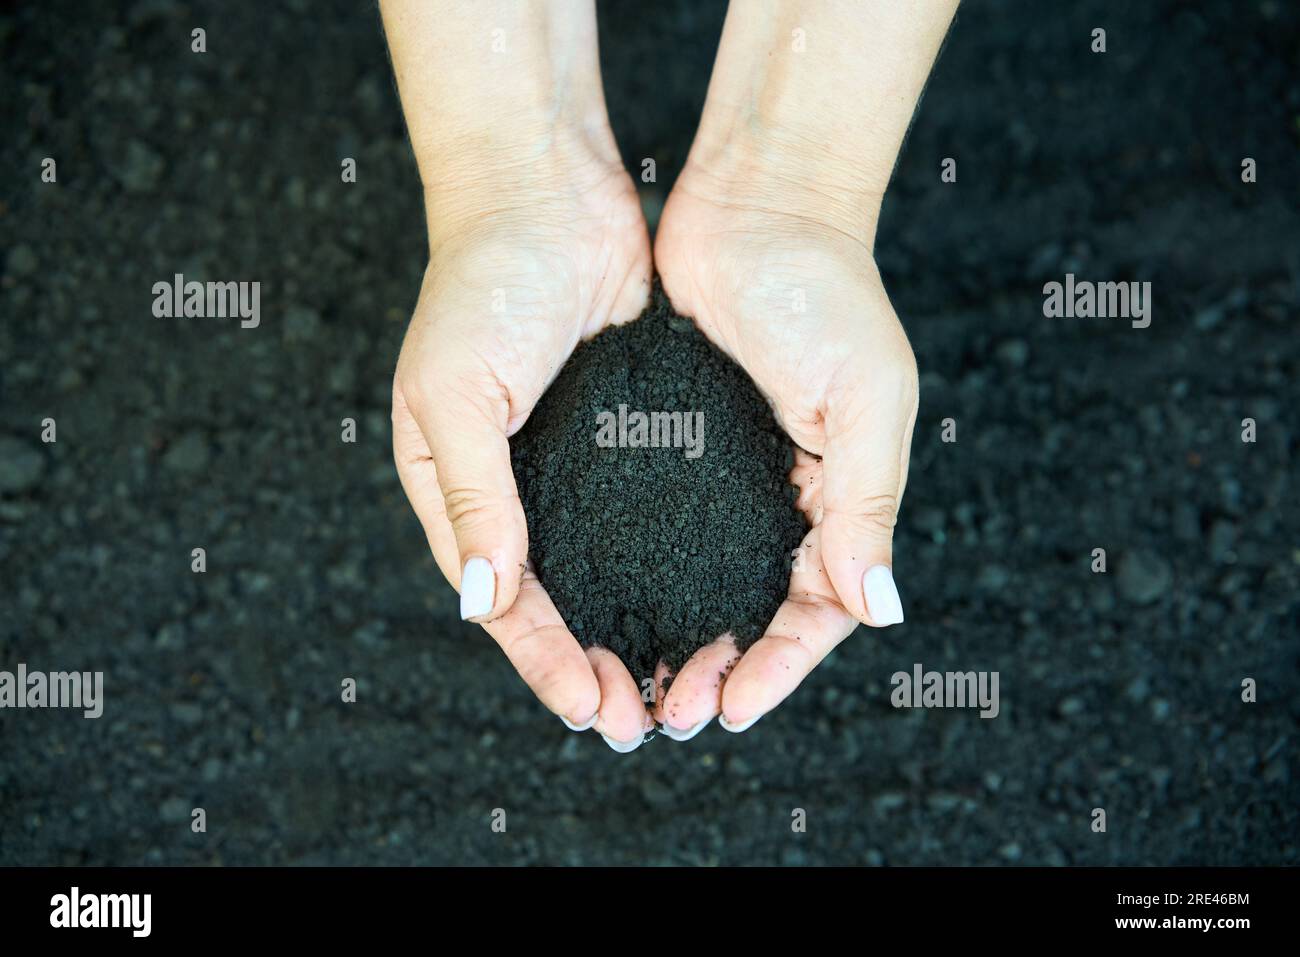 Woman hands holding soil. Top view. New life, eco, sustainable living, zero waste, plastic free, earth day, investment concept. Stock Photo